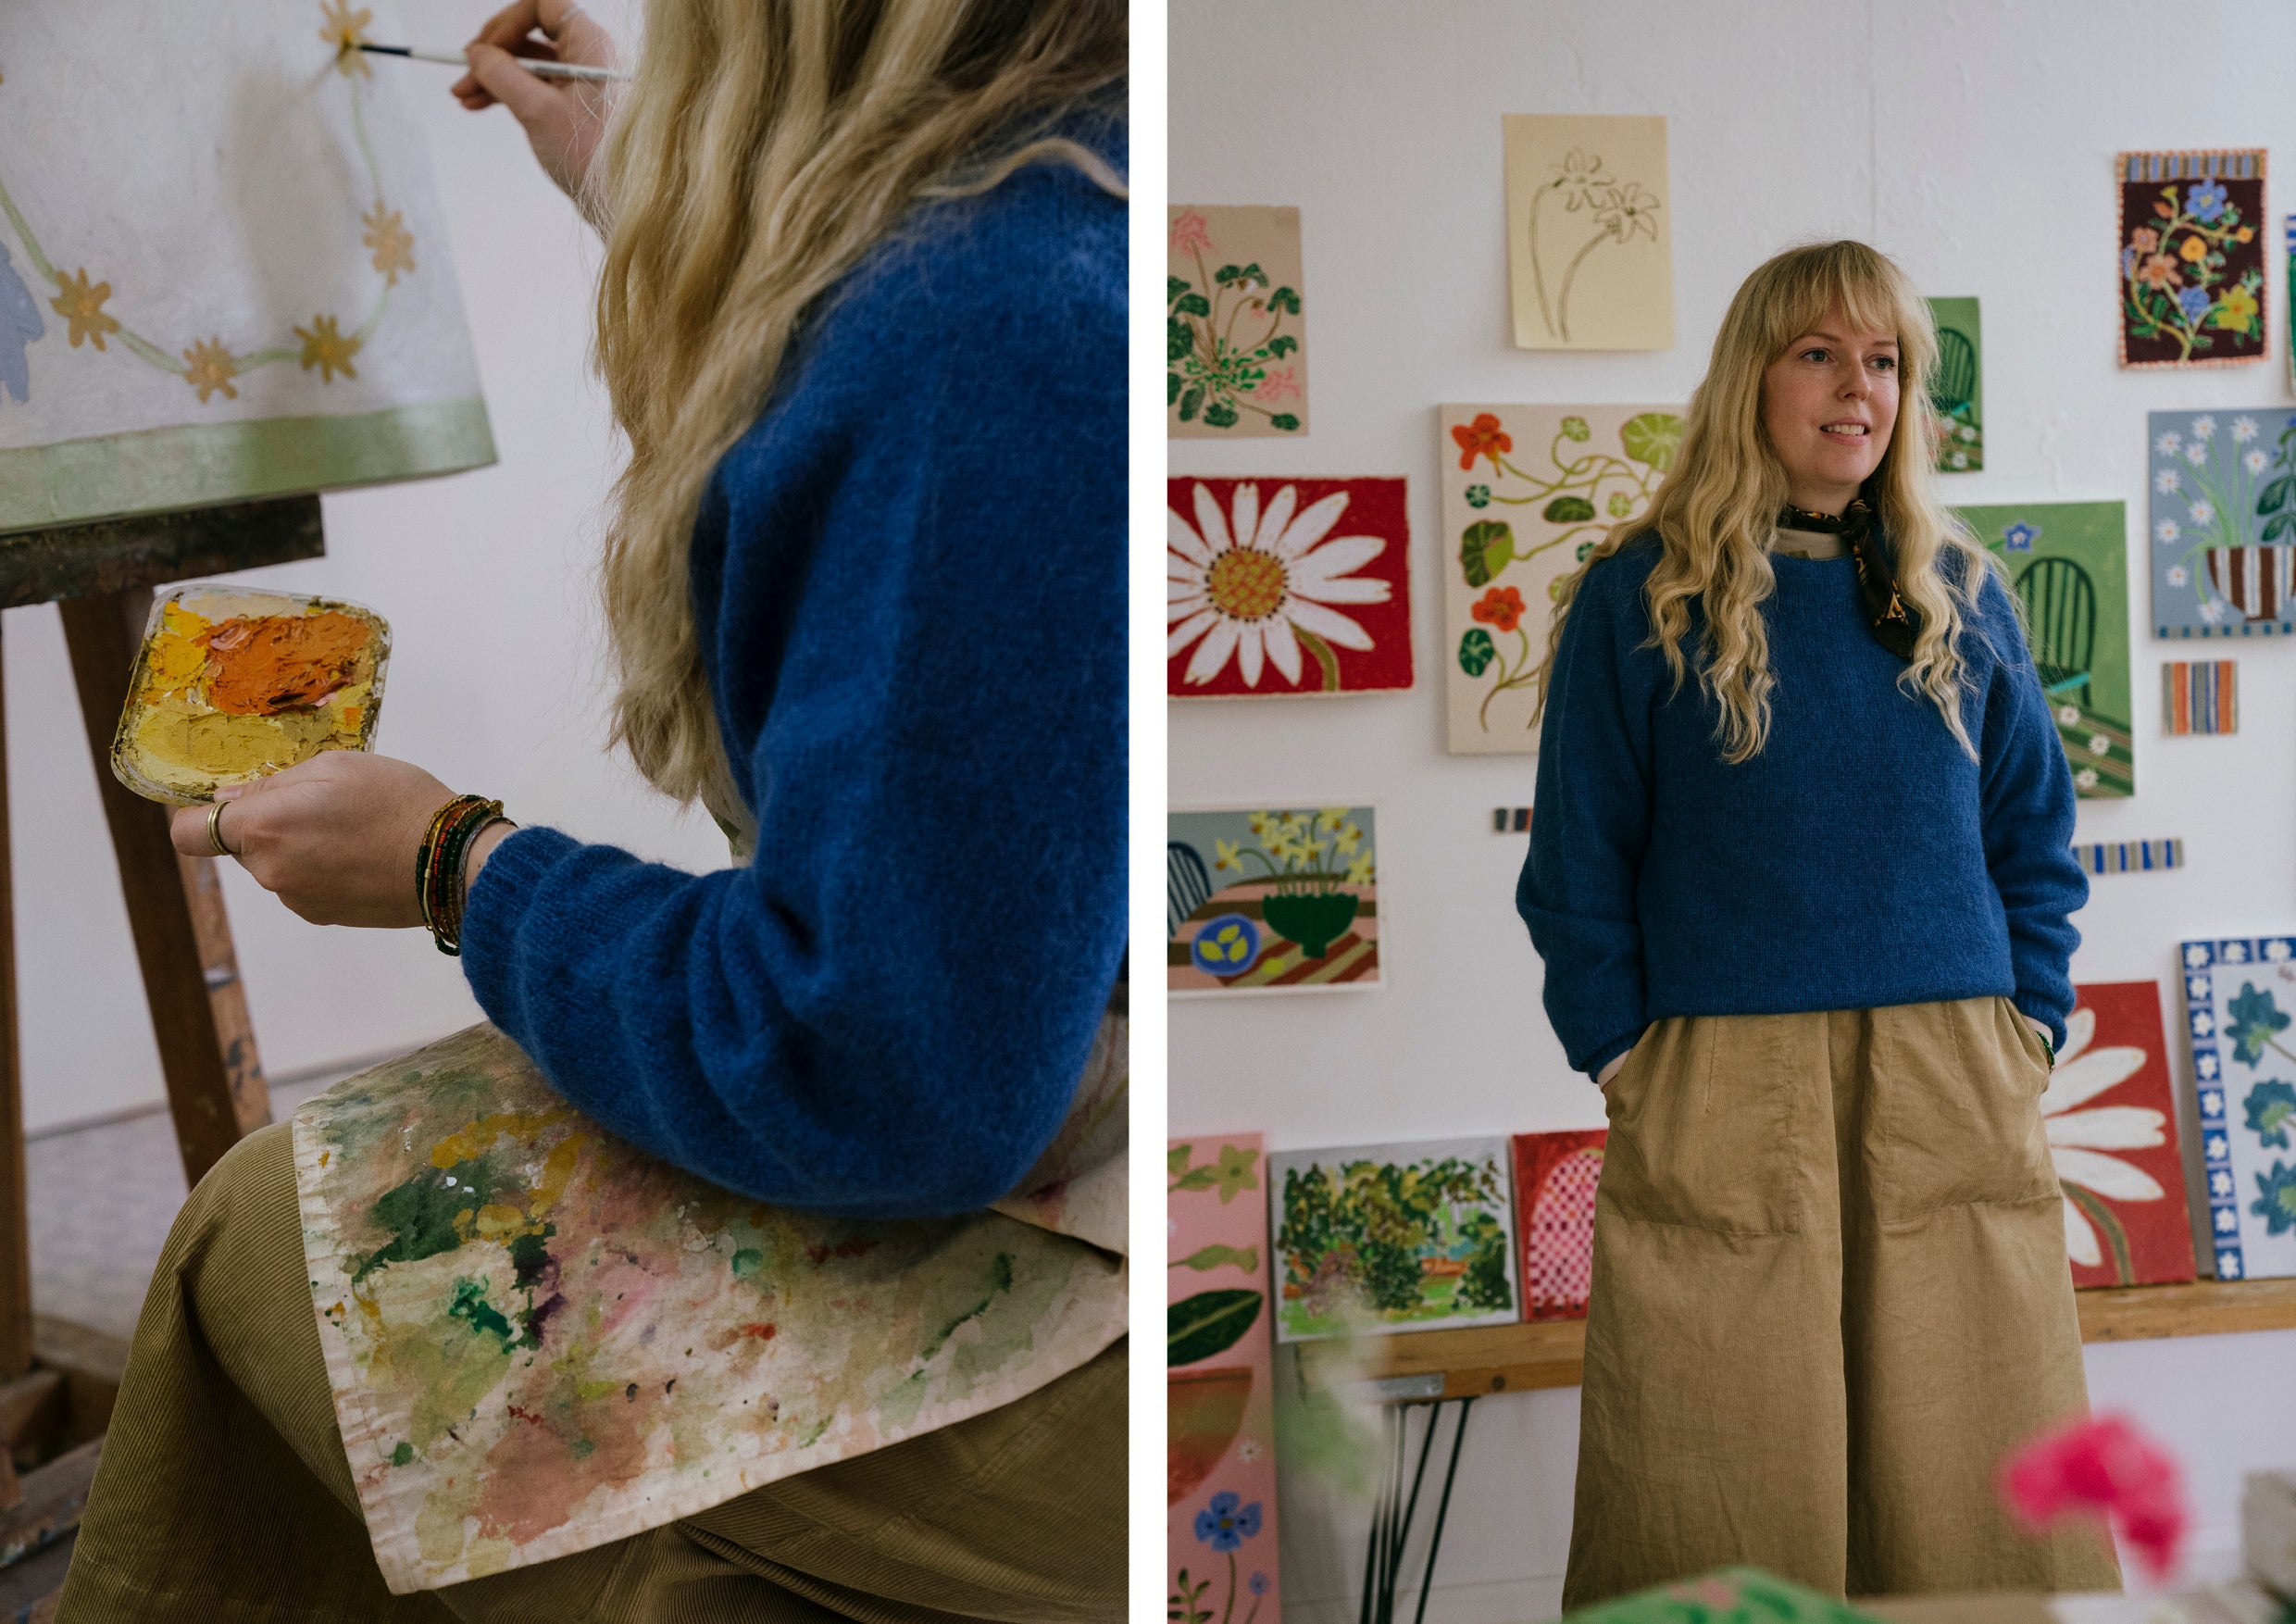 An artist wearing a blue jumper, painting in her studio